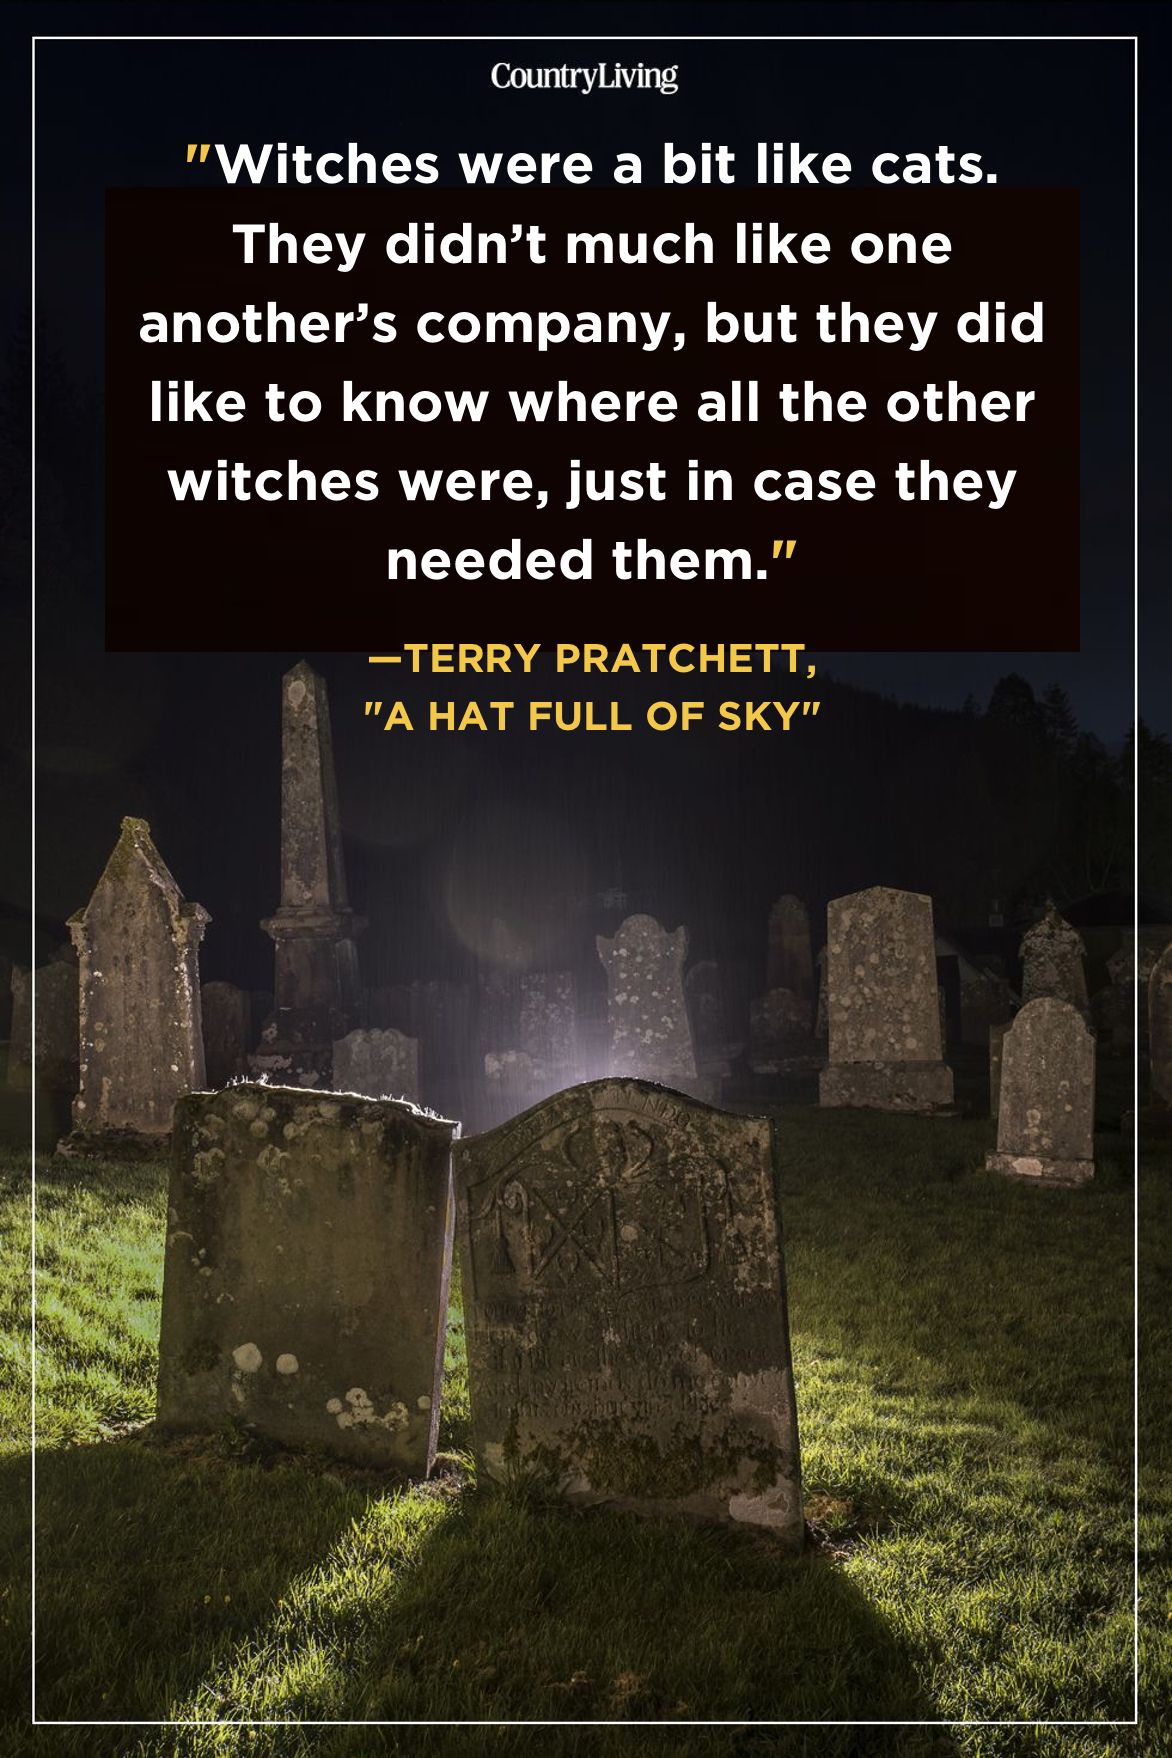 40 Best Witch Quotes - Quotes and Sayings About Witches